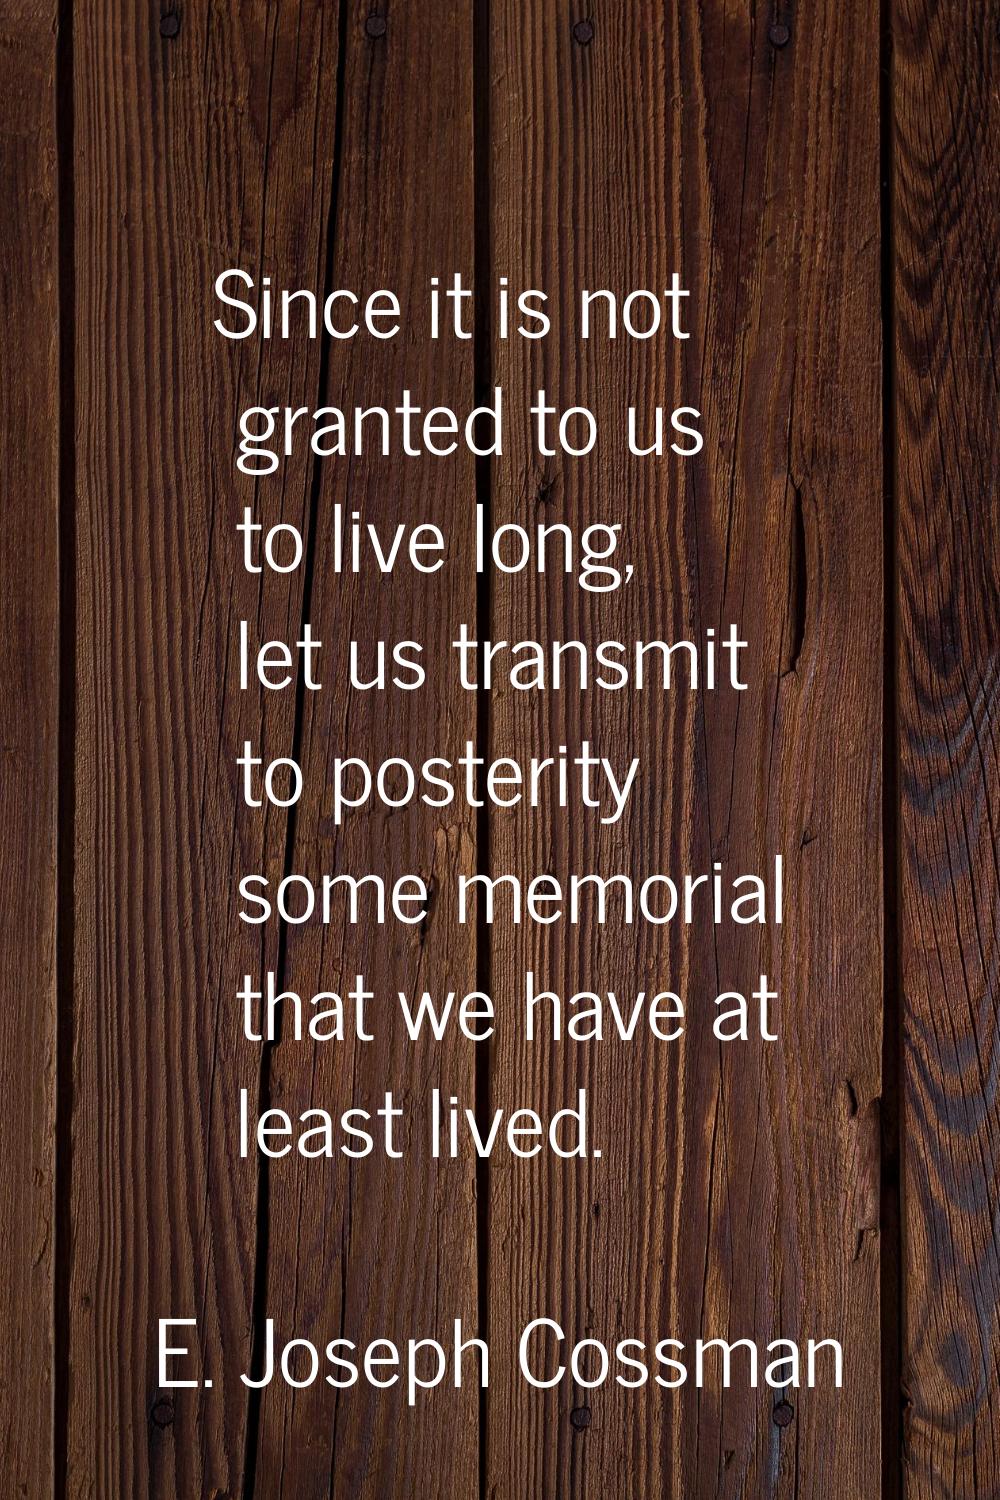 Since it is not granted to us to live long, let us transmit to posterity some memorial that we have